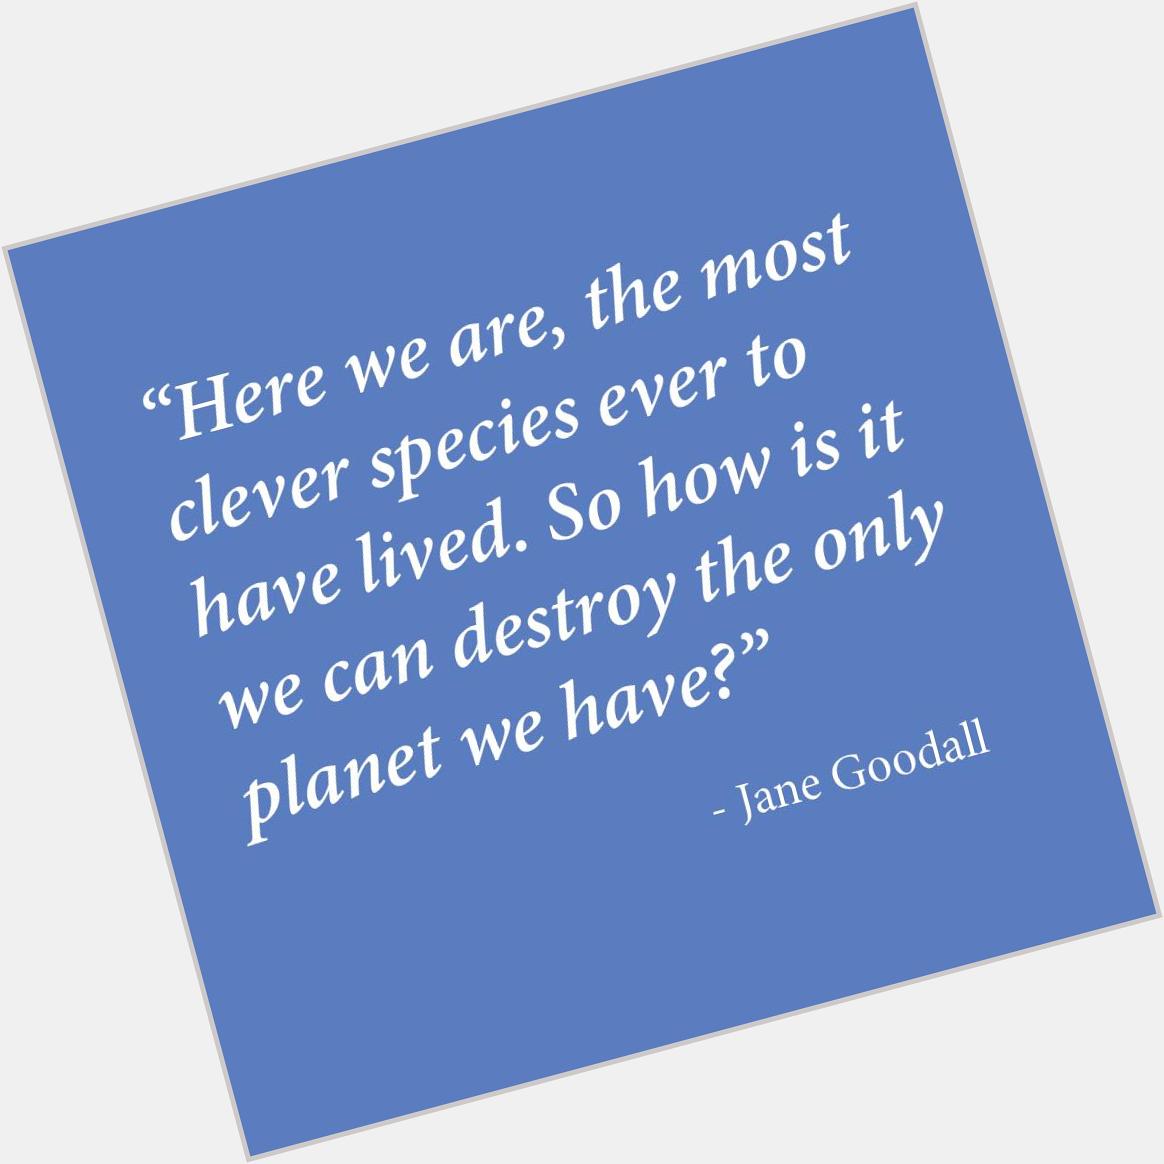 Happy Birthday, Jane Goodall! May you continue to inspire us all to be better stewards of our planet & its creatures. 